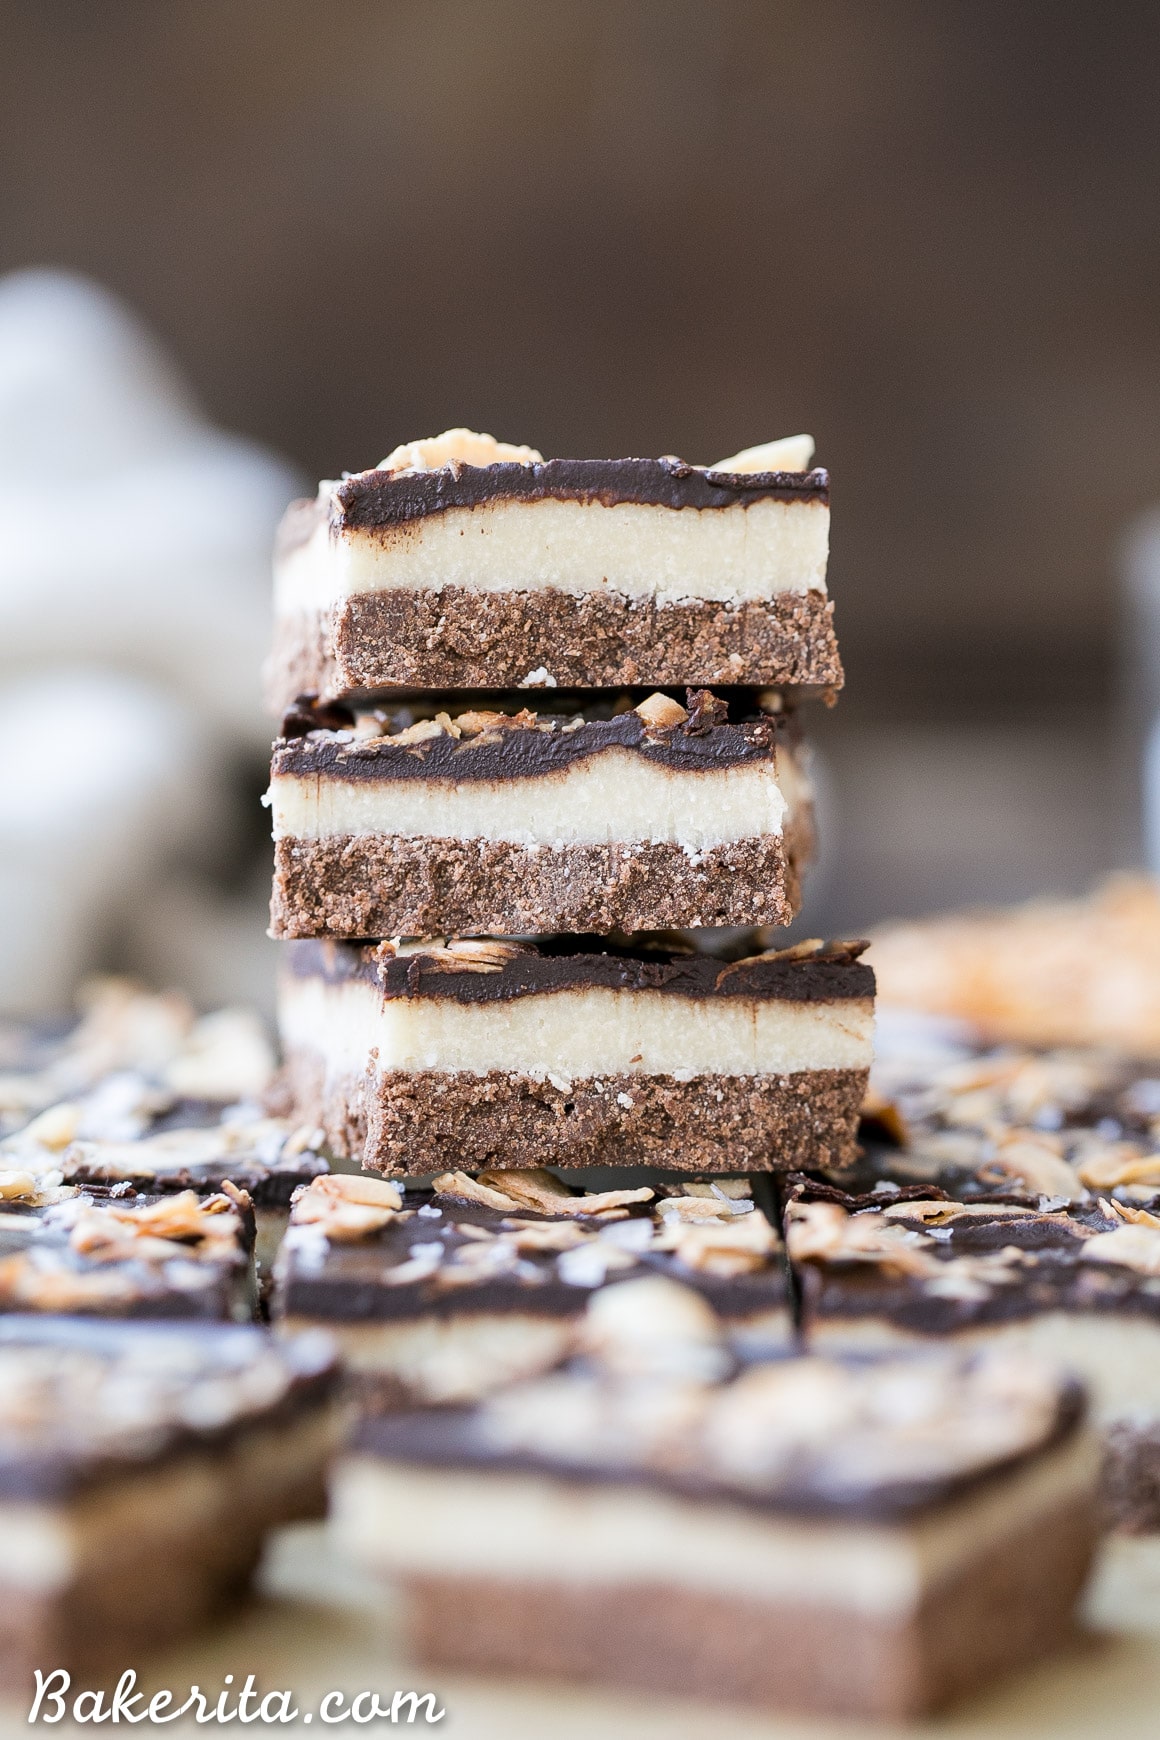 These Chocolate Coconut Bars have three irresistible layers - a chocolate shortbread crust, a melt-in-your-mouth coconut butter filling, and a chocolate topping with toasted coconut! Any coconut lover is going to love these gluten-free, Paleo + vegan dessert bars.